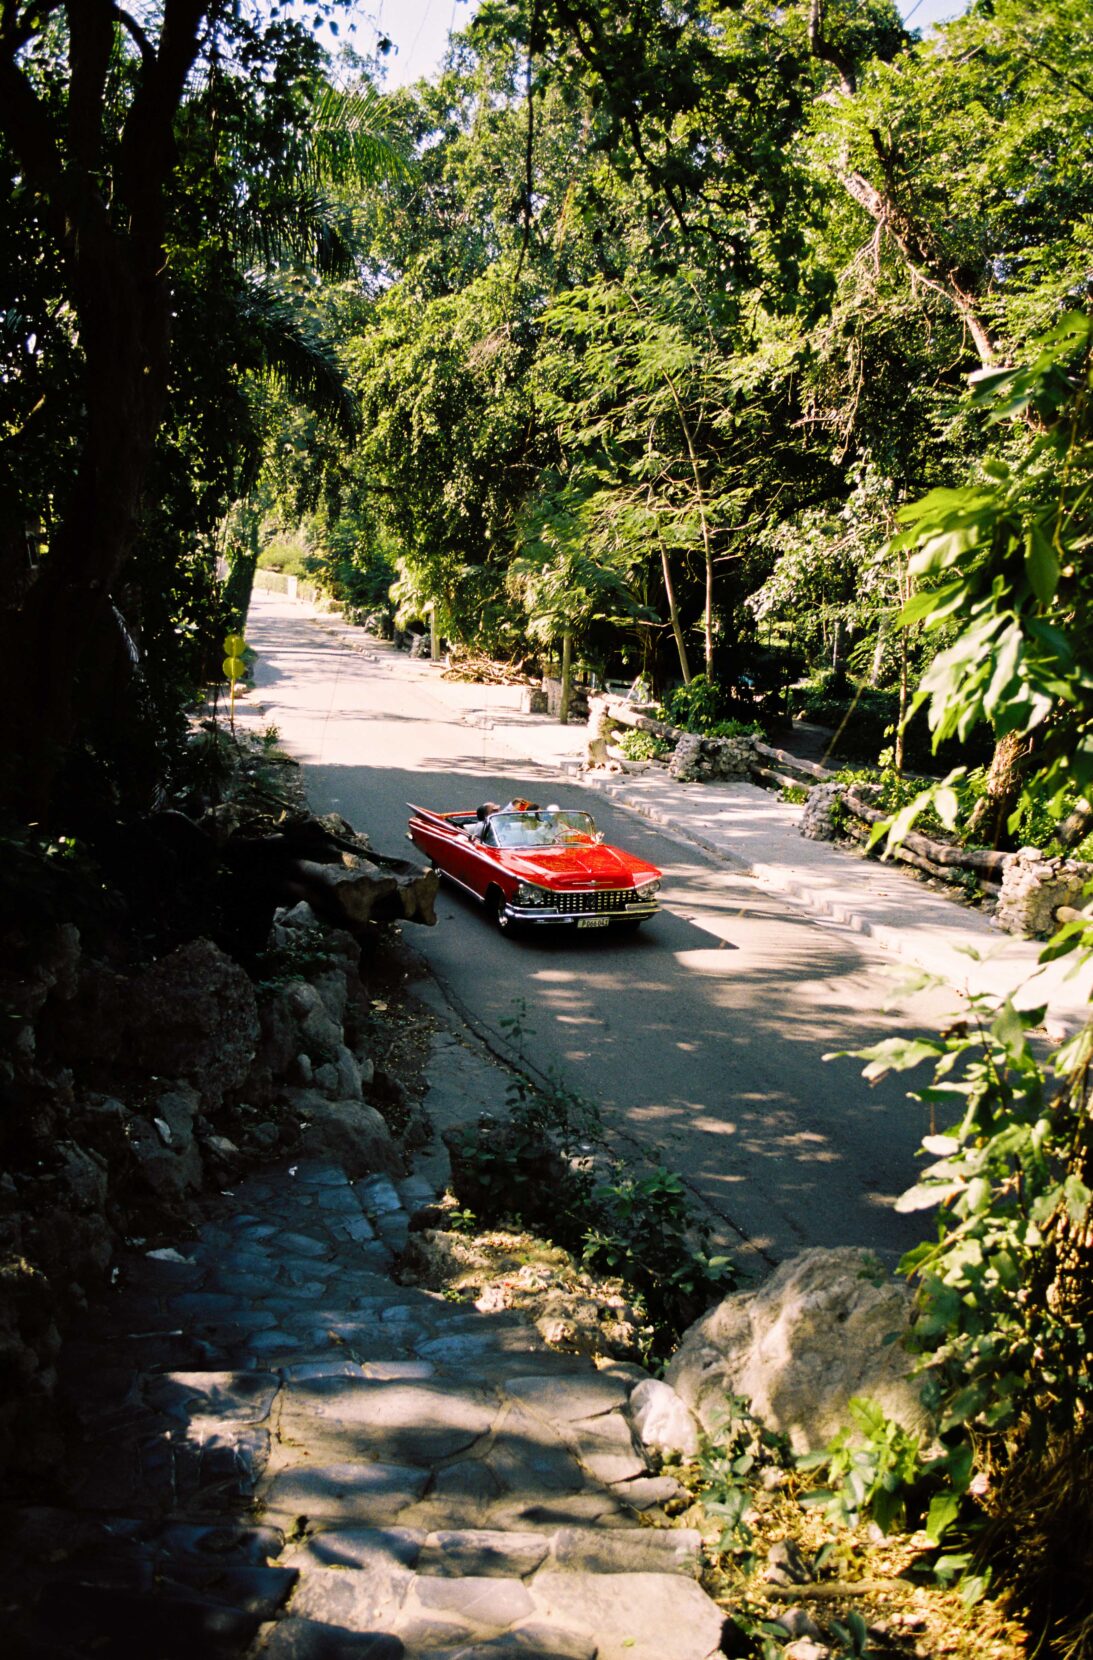 An old, bright red convertible drives along a road surrounded by tropical plants.